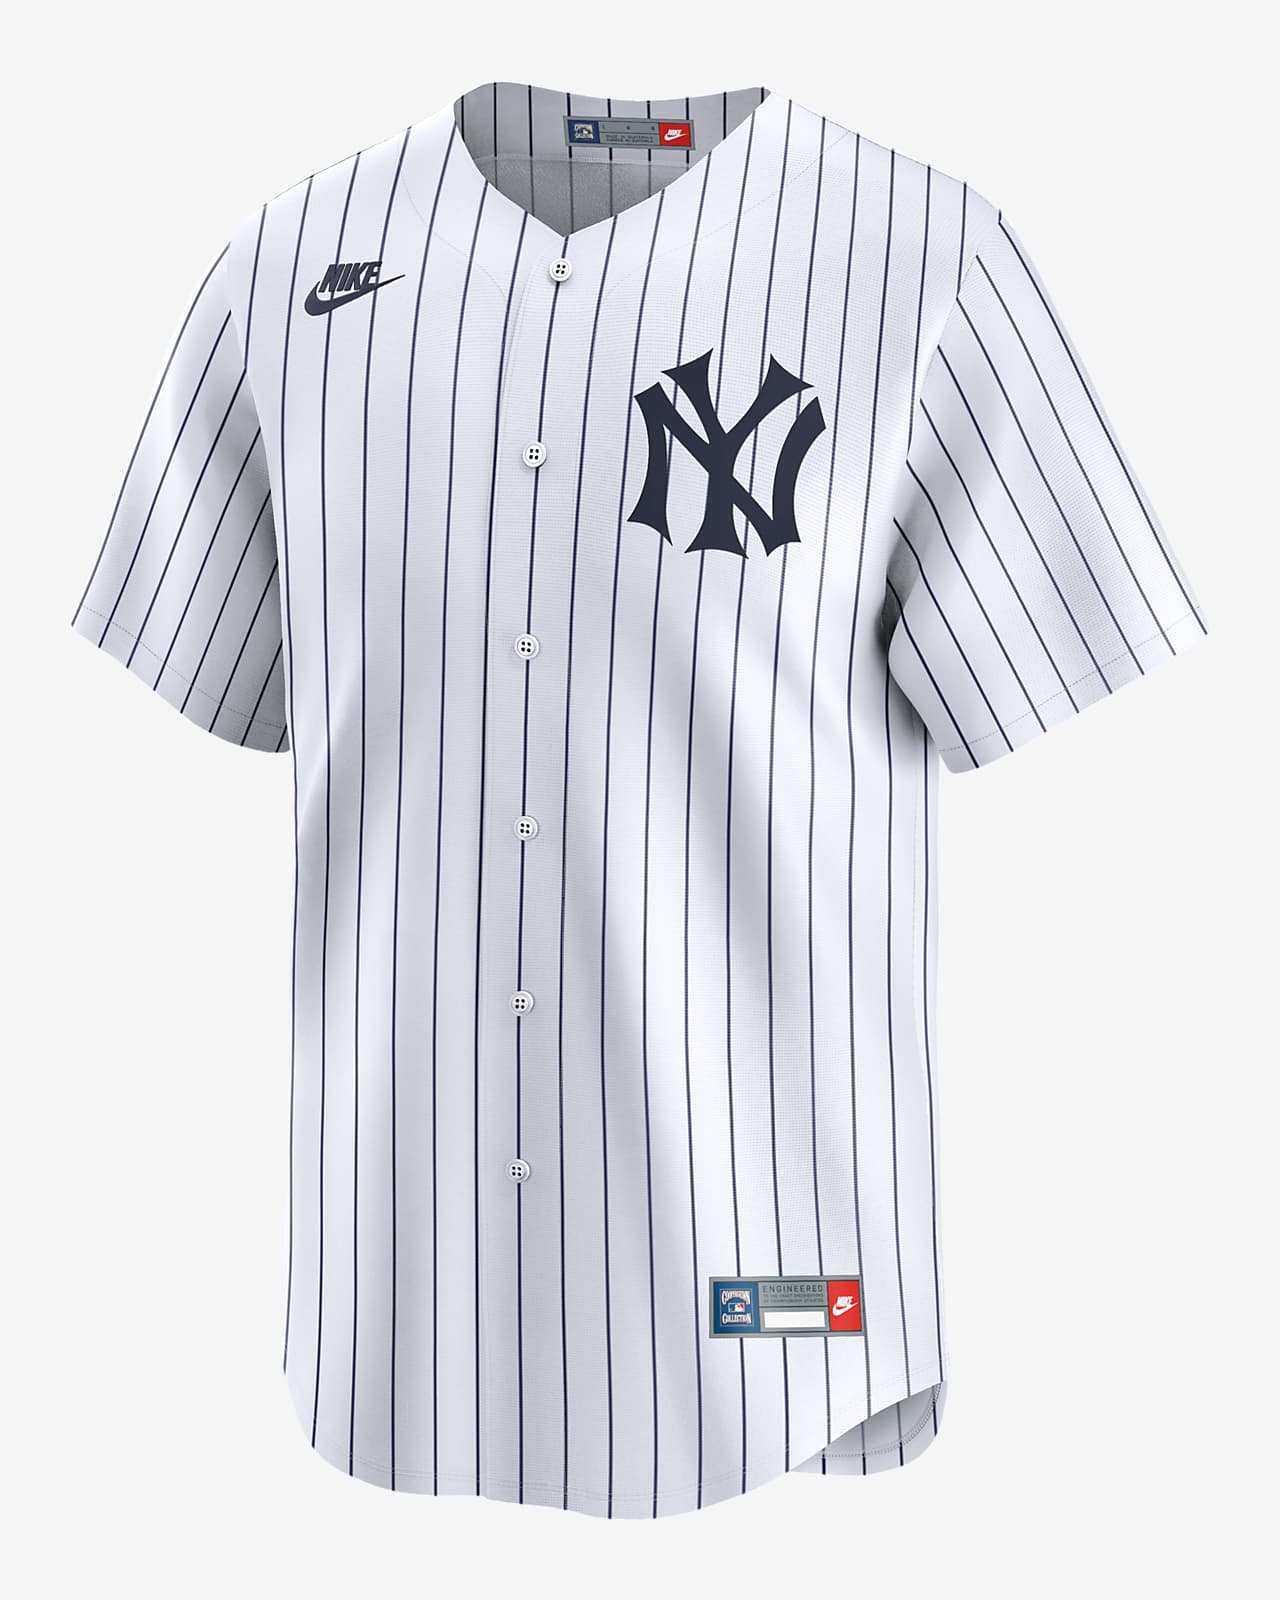 Jersey Nike Dri-FIT ADV de la MLB Limited para hombre New York Yankees Cooperstown